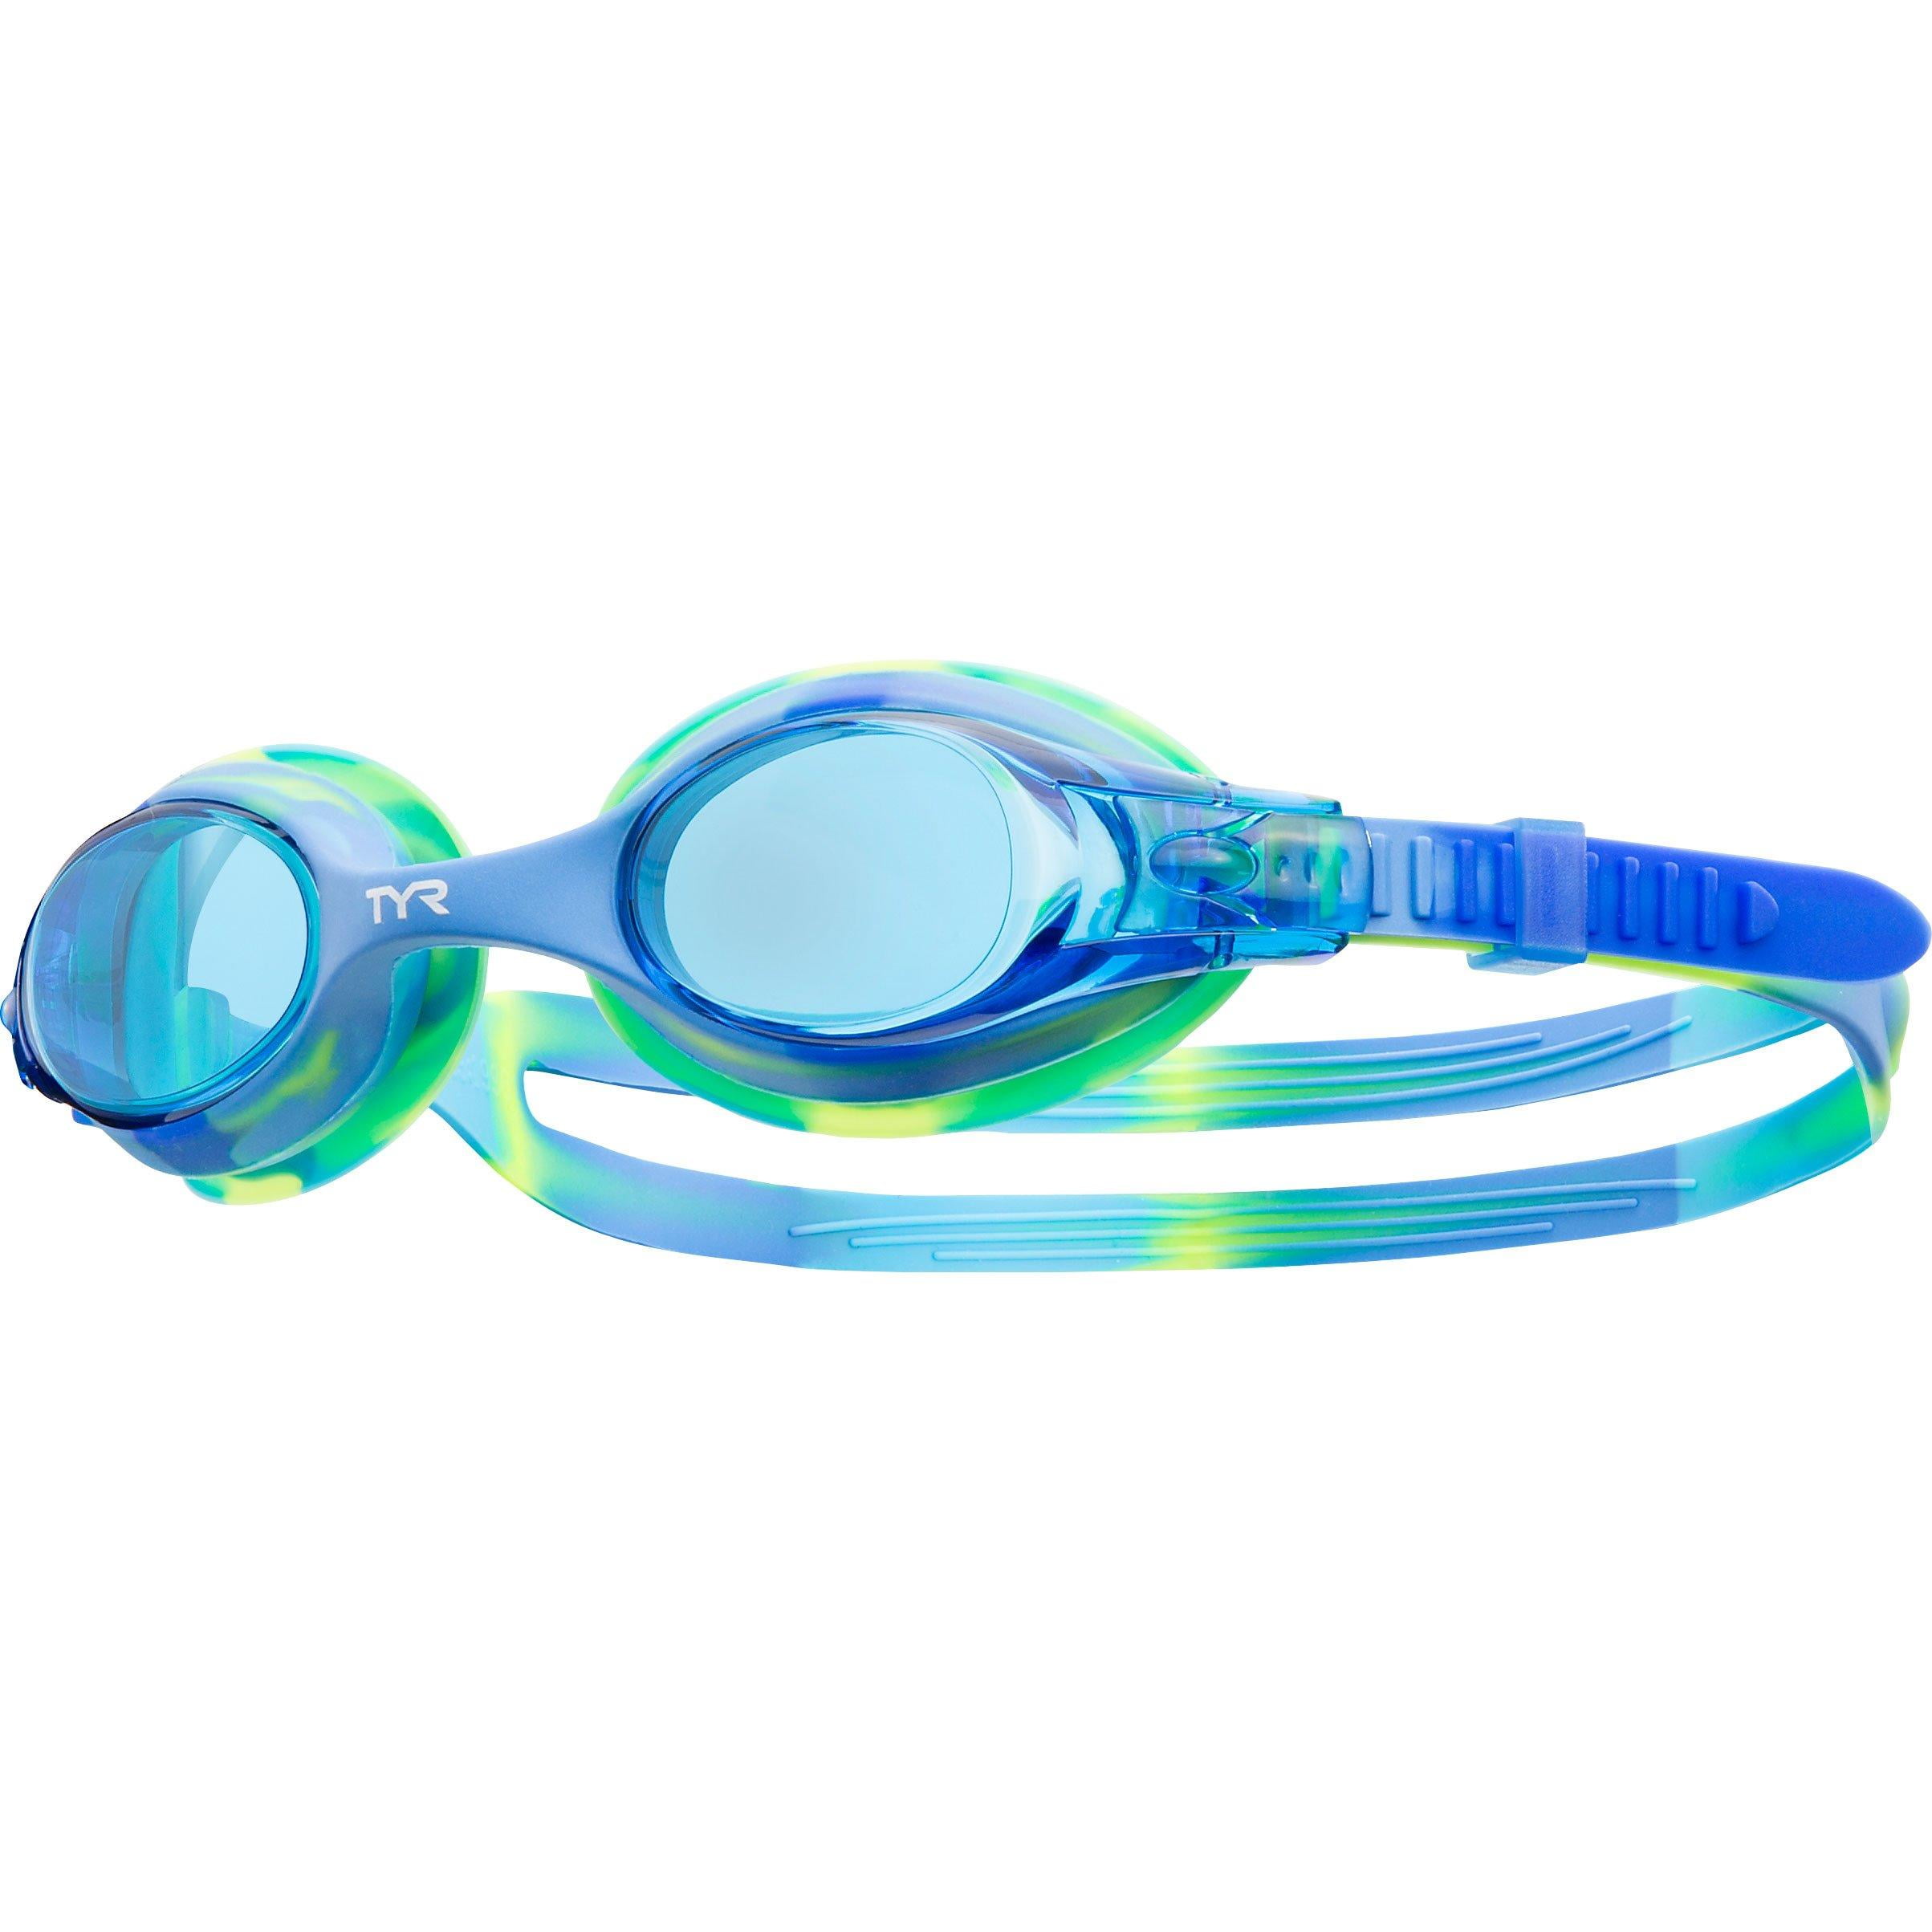 2 Details about   Set of NEW TYR Adult 16 Teal Green & Grey Velocity Swim Goggles  Blue 